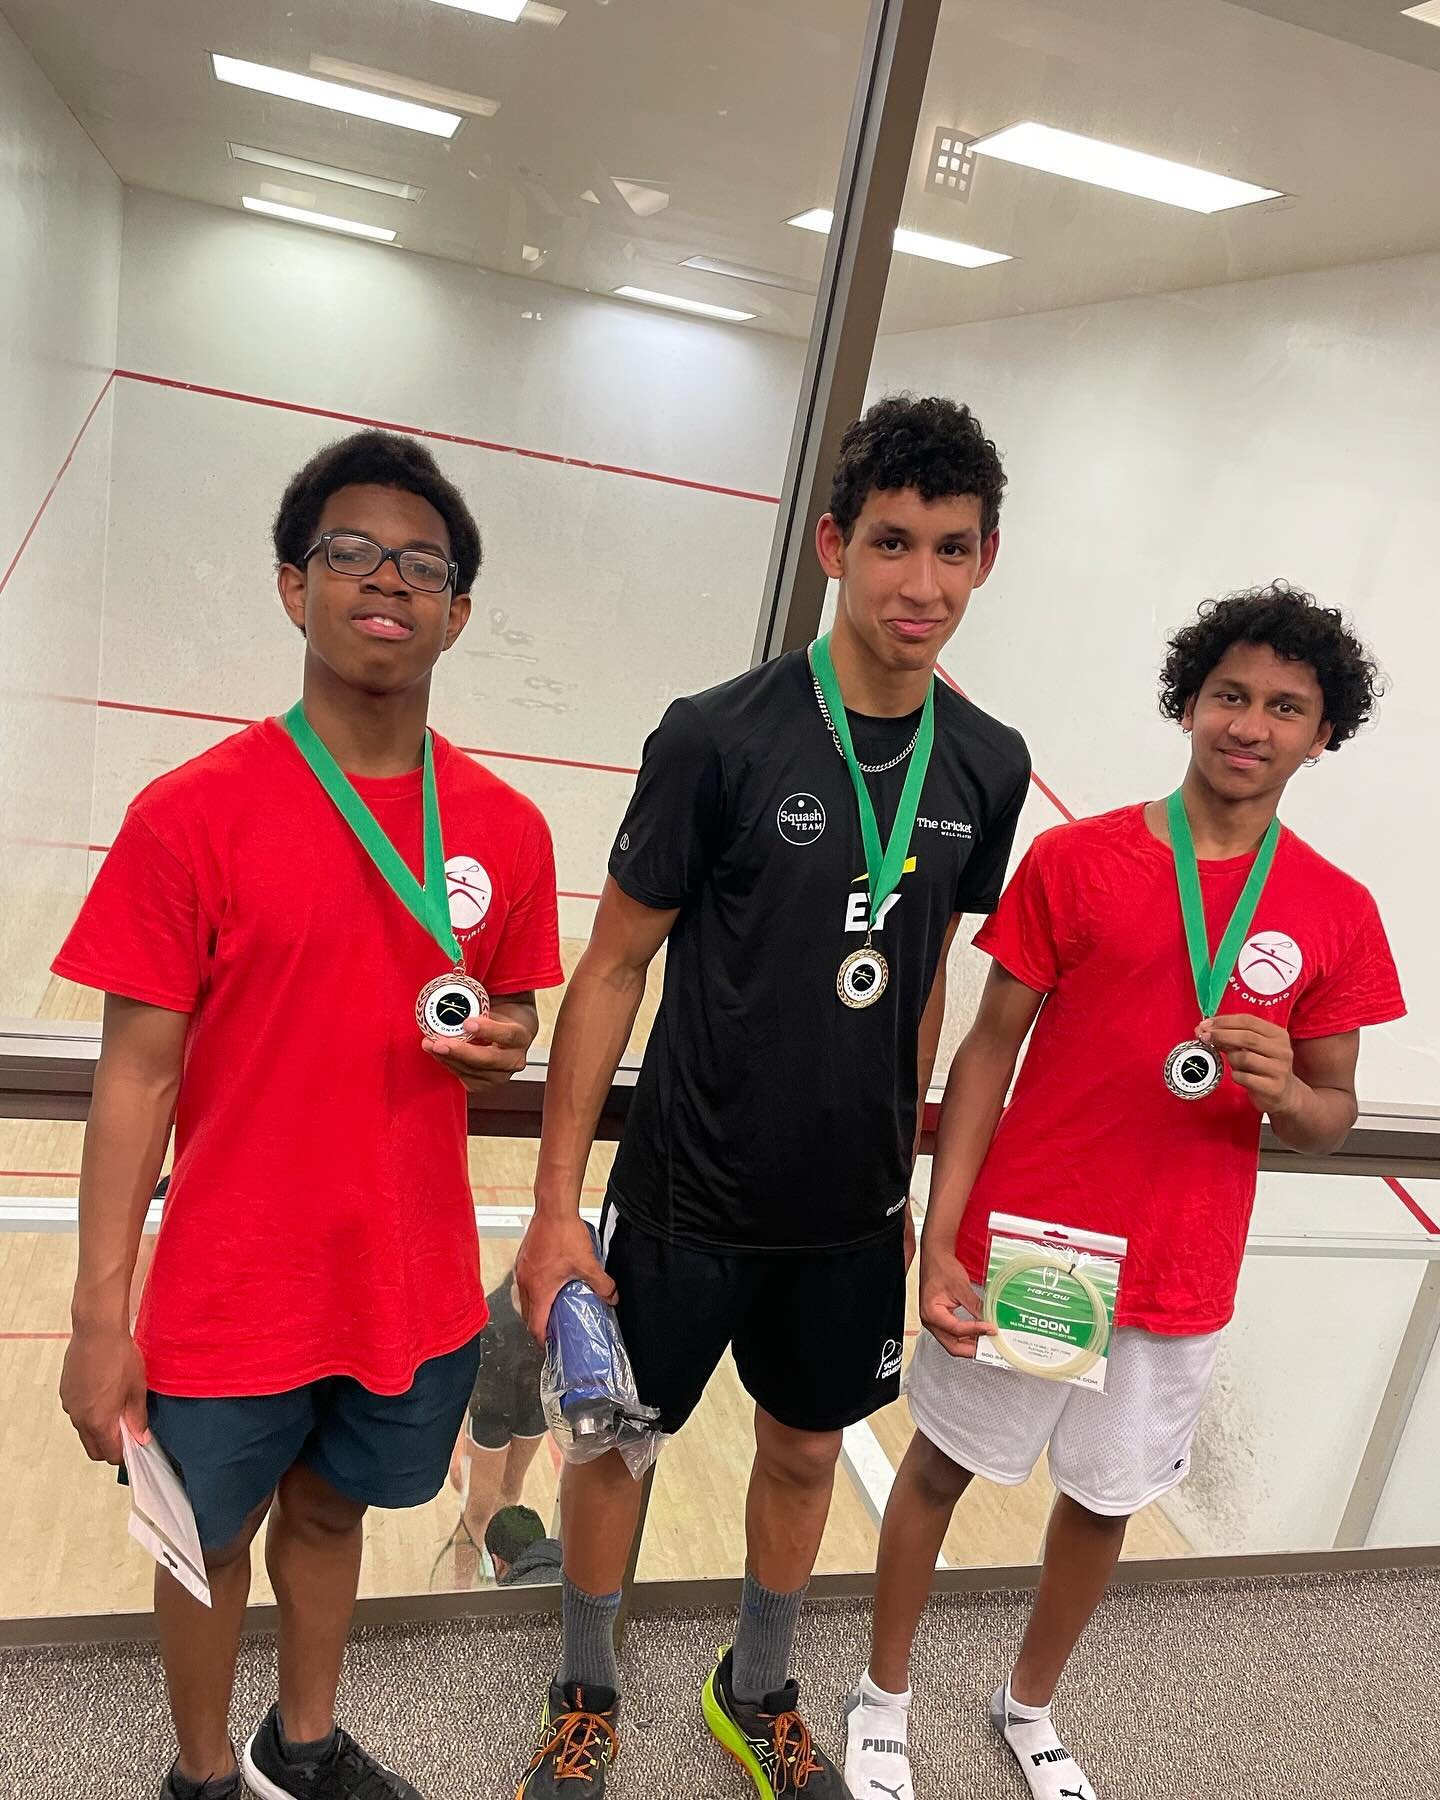 Silver at squash&rsquo;about Dunfield 📸‼️

Joshua for 3rd place U15 and Carlos won 🥇 U17/19